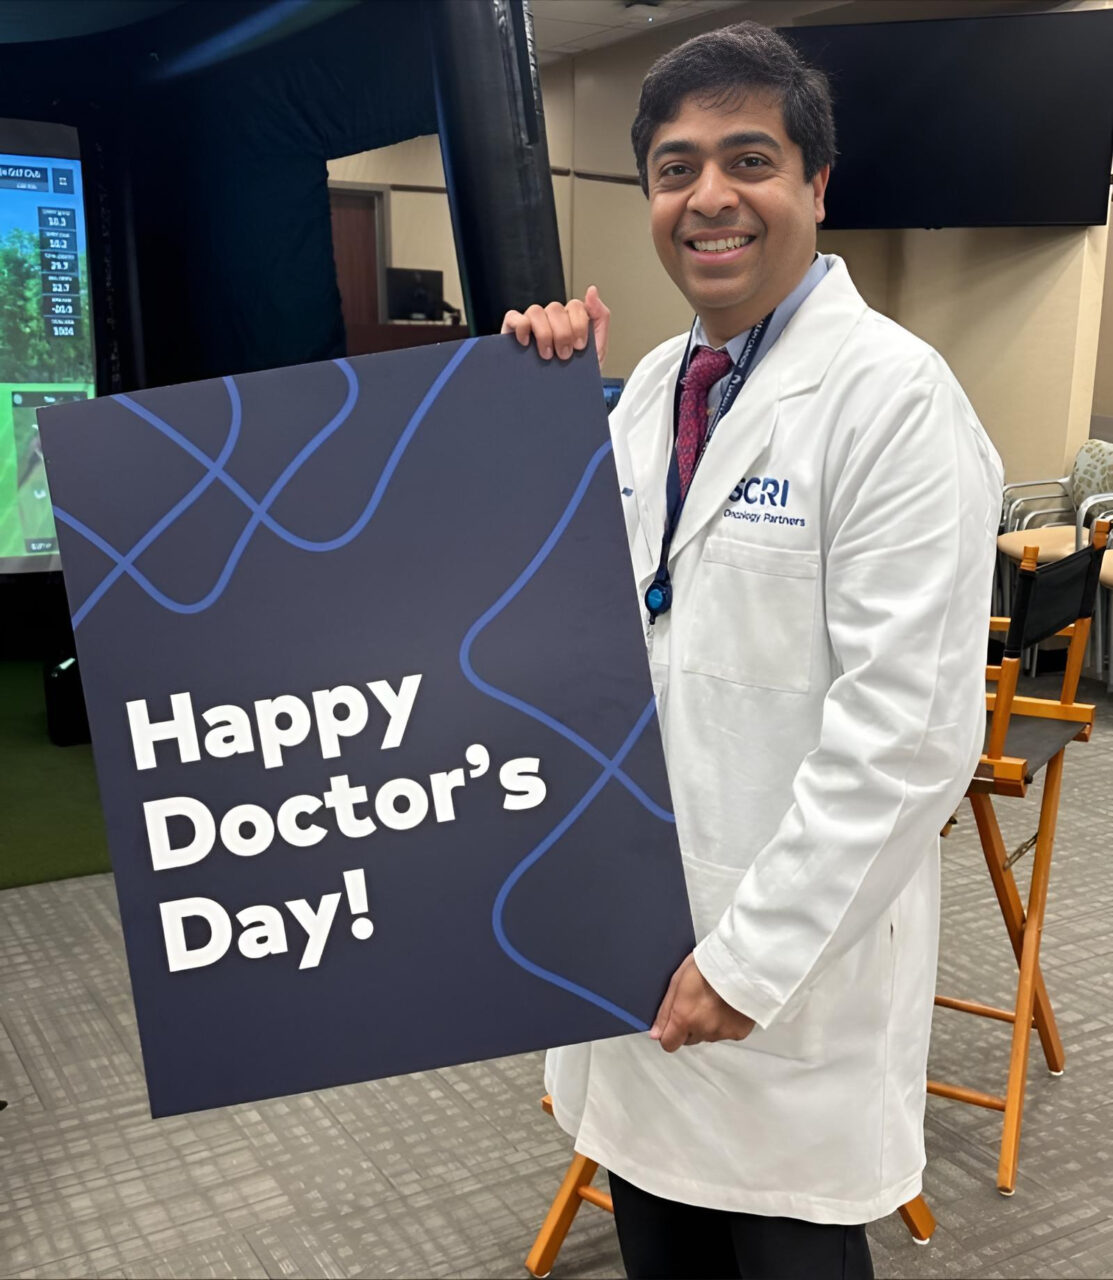 Vivek Subbiah: On Doctors’ Day, feeling blessed to receive hugs from my patients